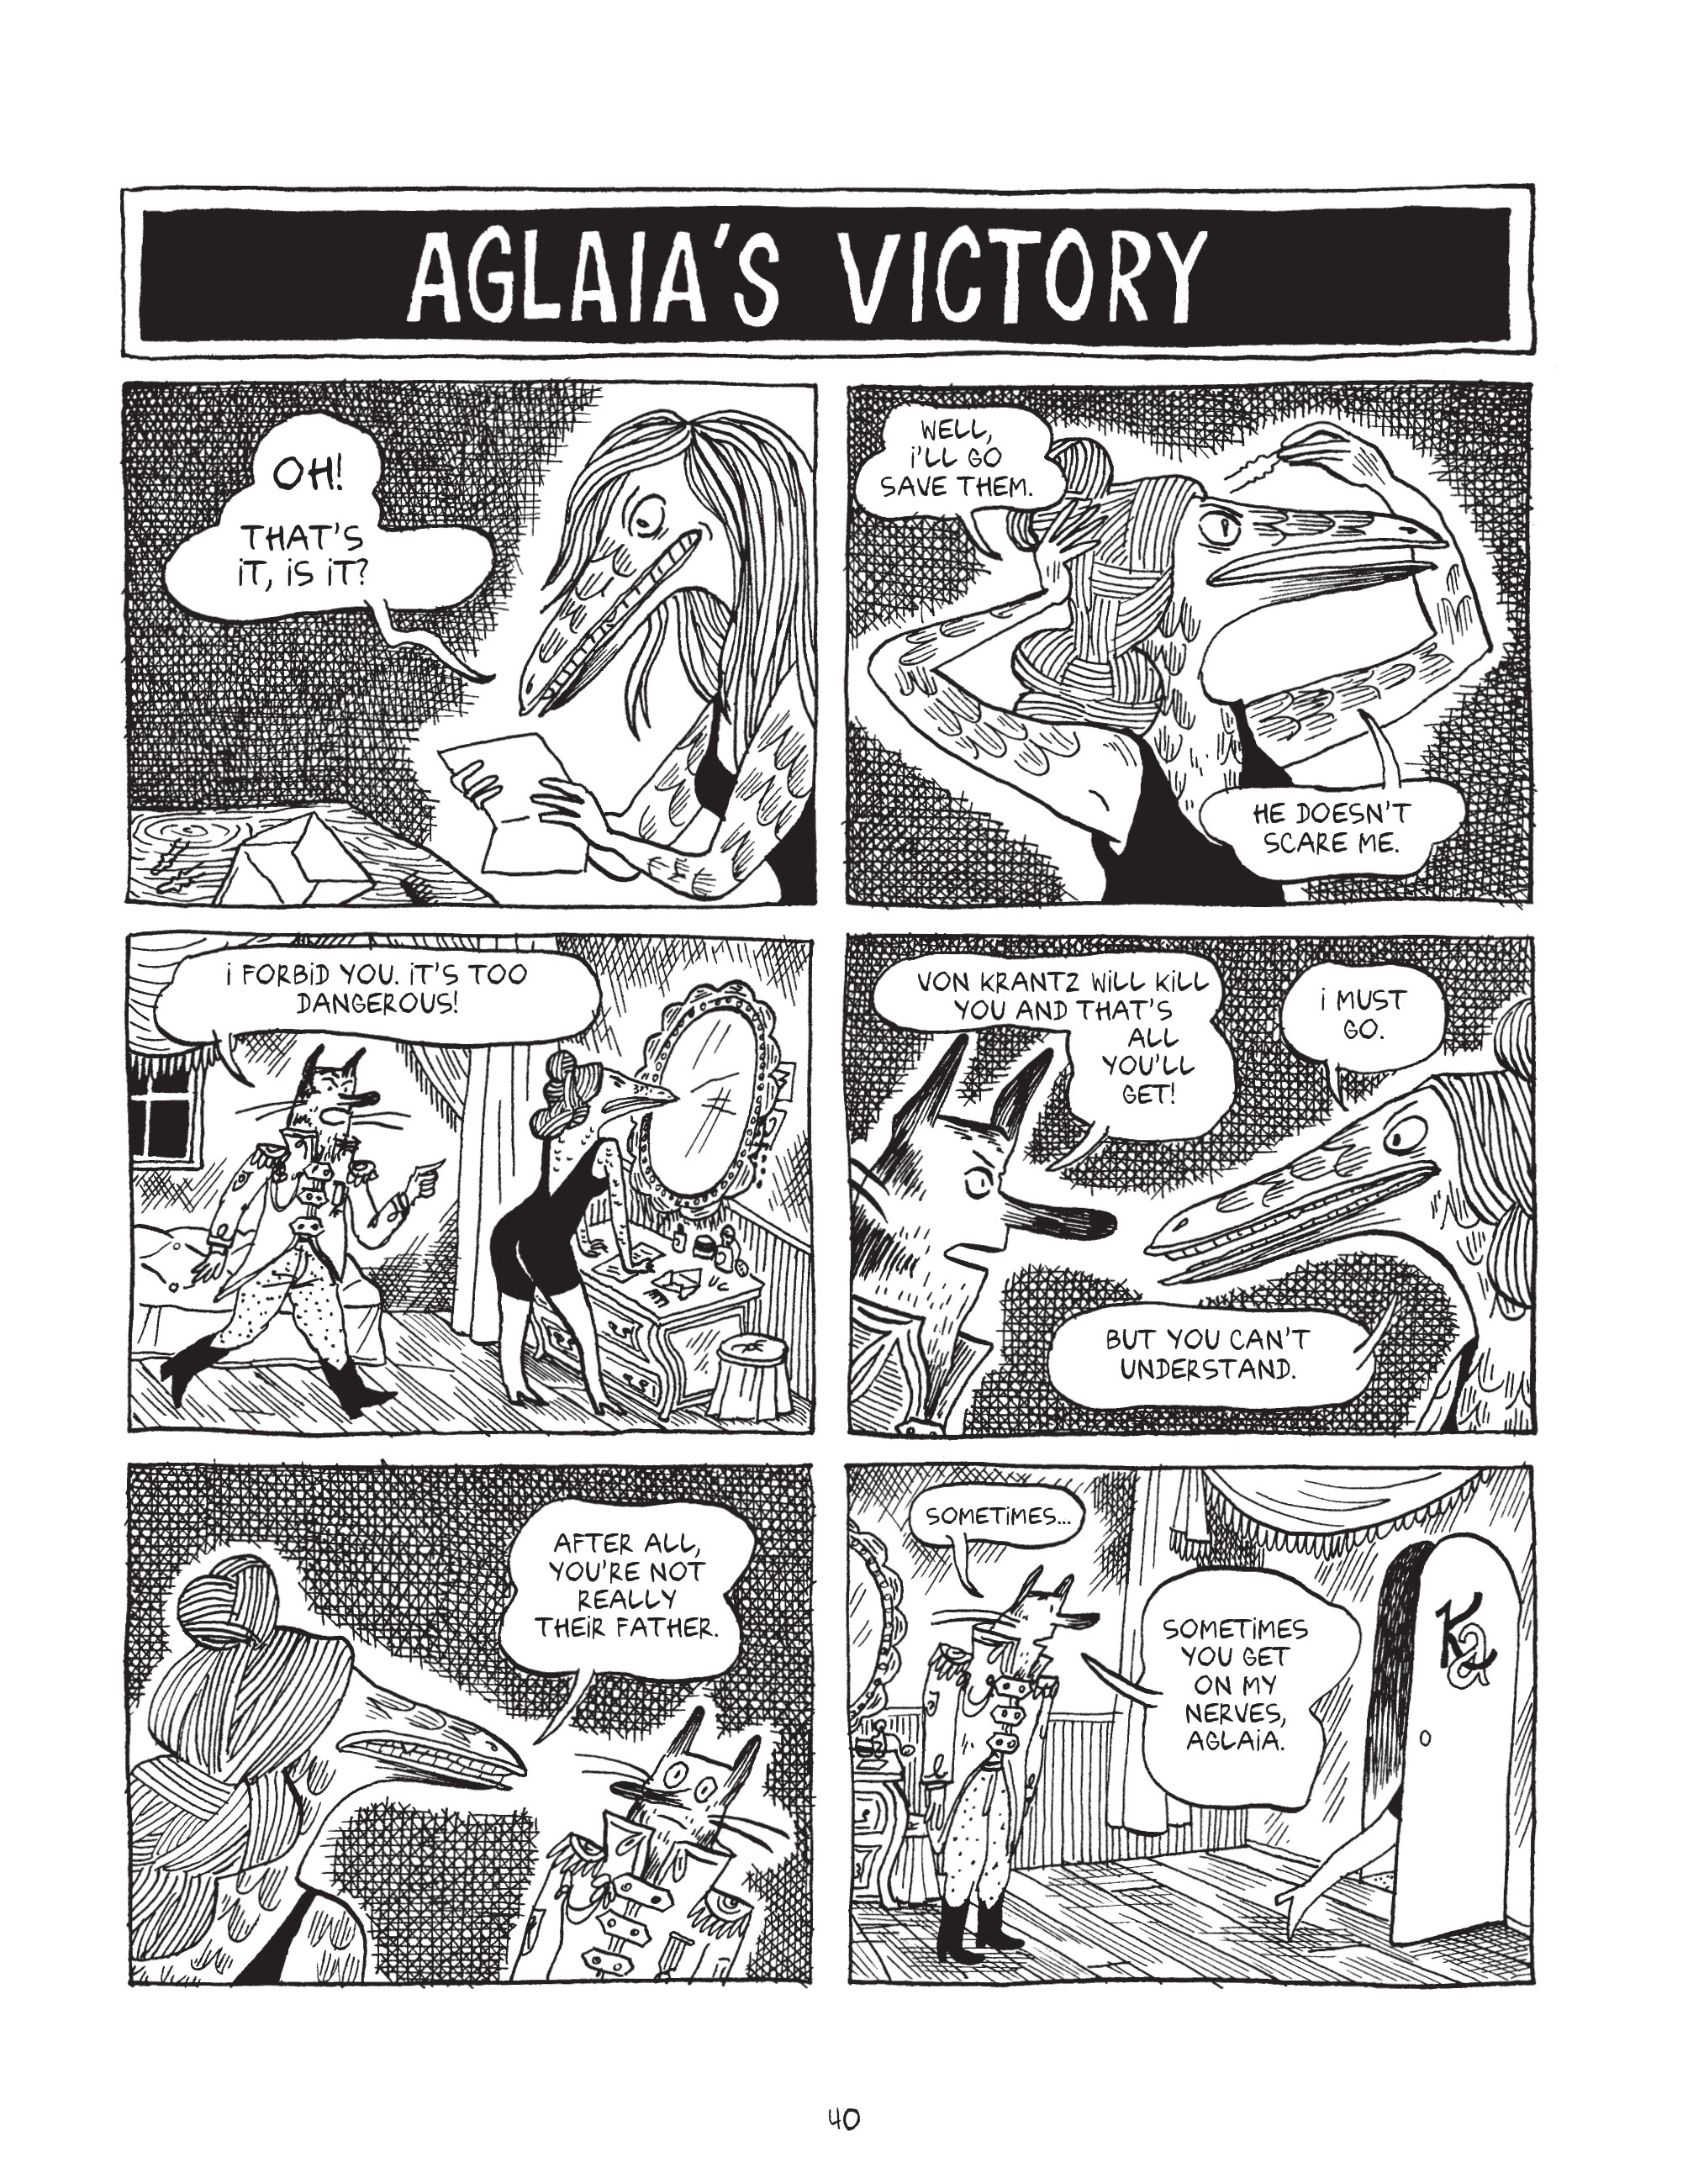 Read online The Song of Aglaia comic -  Issue # TPB - 33